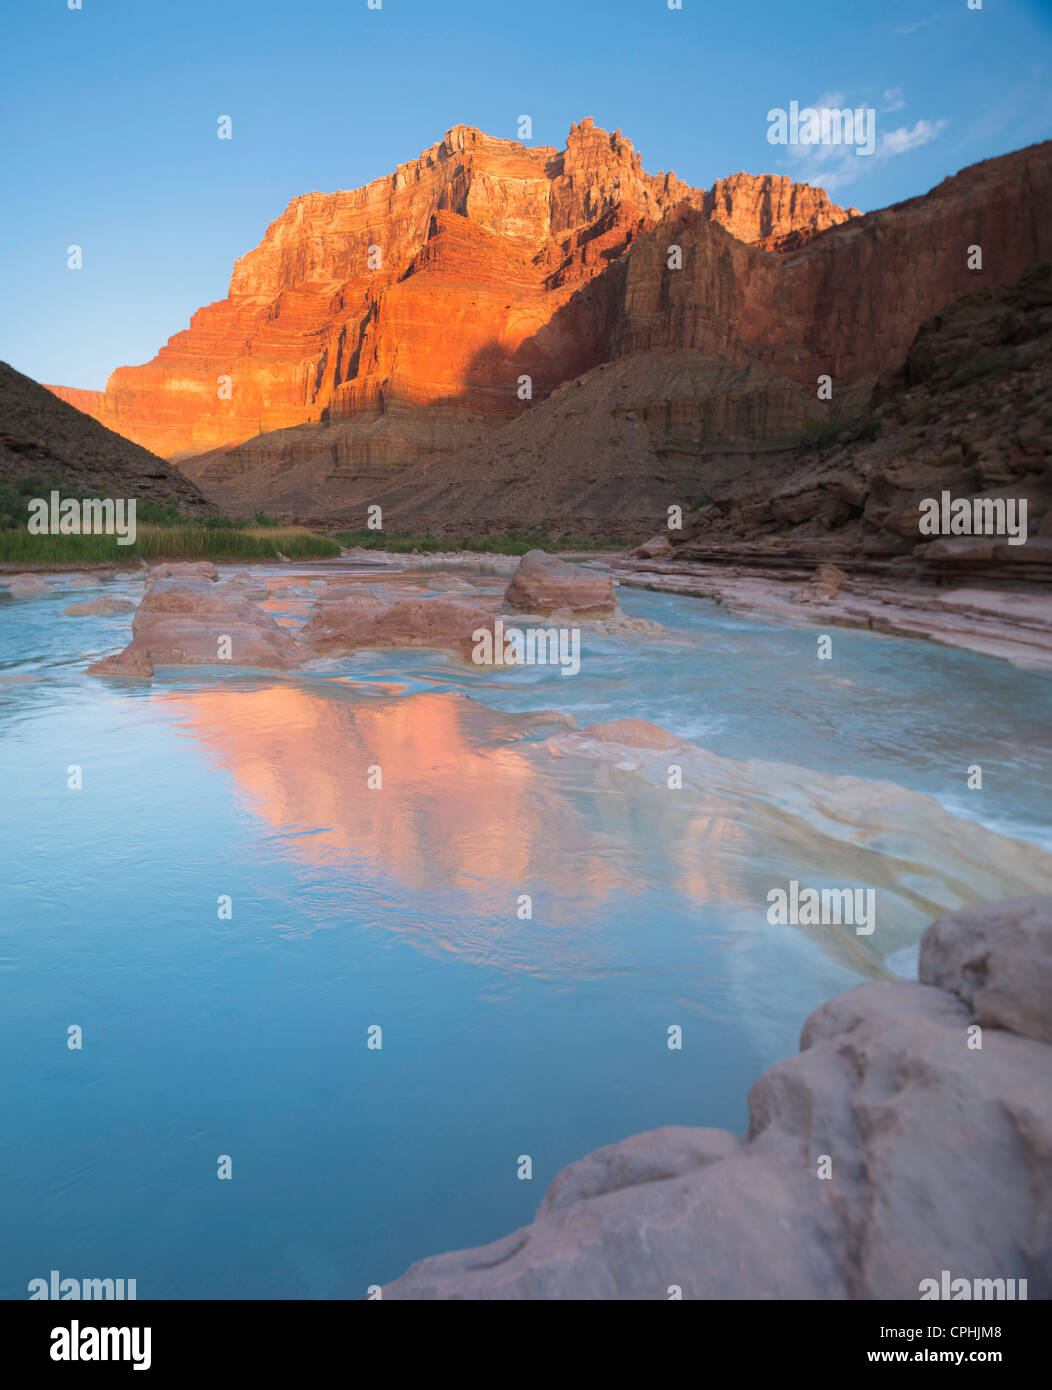 Turquoise waters of the Little Colorado River, Grand Canyon Stock Photo